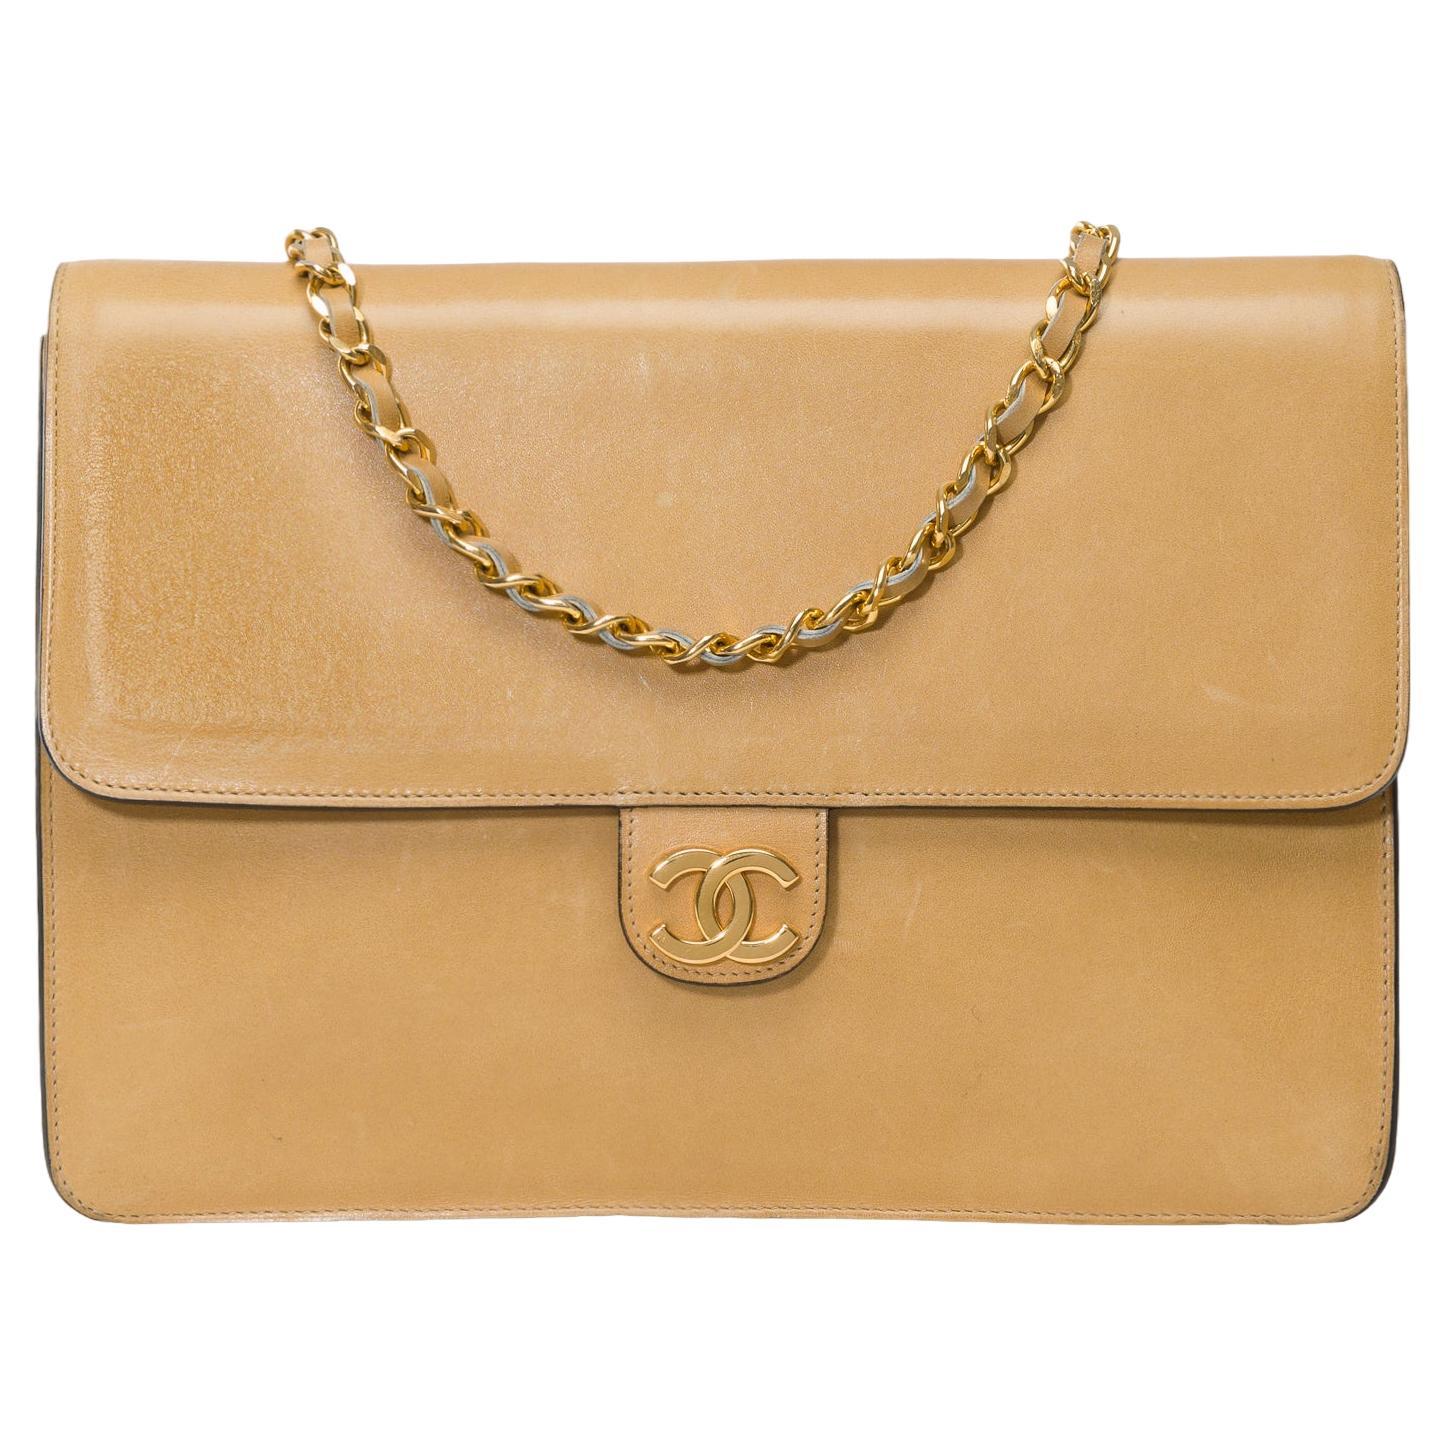 Gorgeous Chanel Classic shoulder flap bag in beige box calfskin leather, GHW For Sale